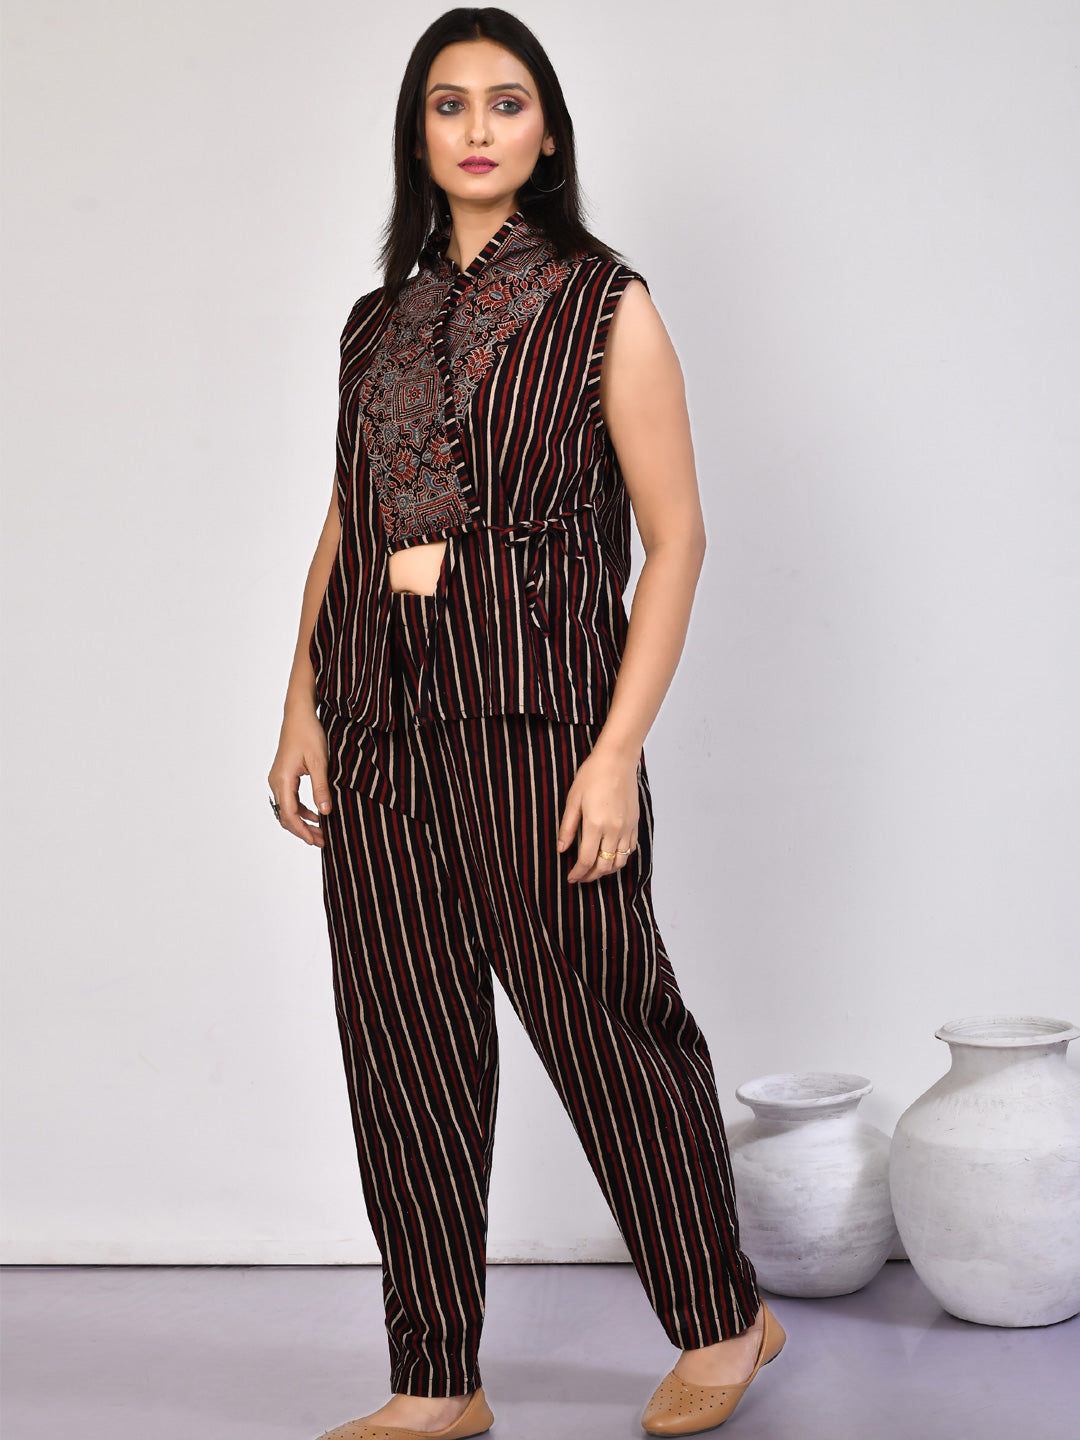 Bella Black handprinted Ajrakh pure Cotton Co-ord set, great for all day long wear in summers-4 